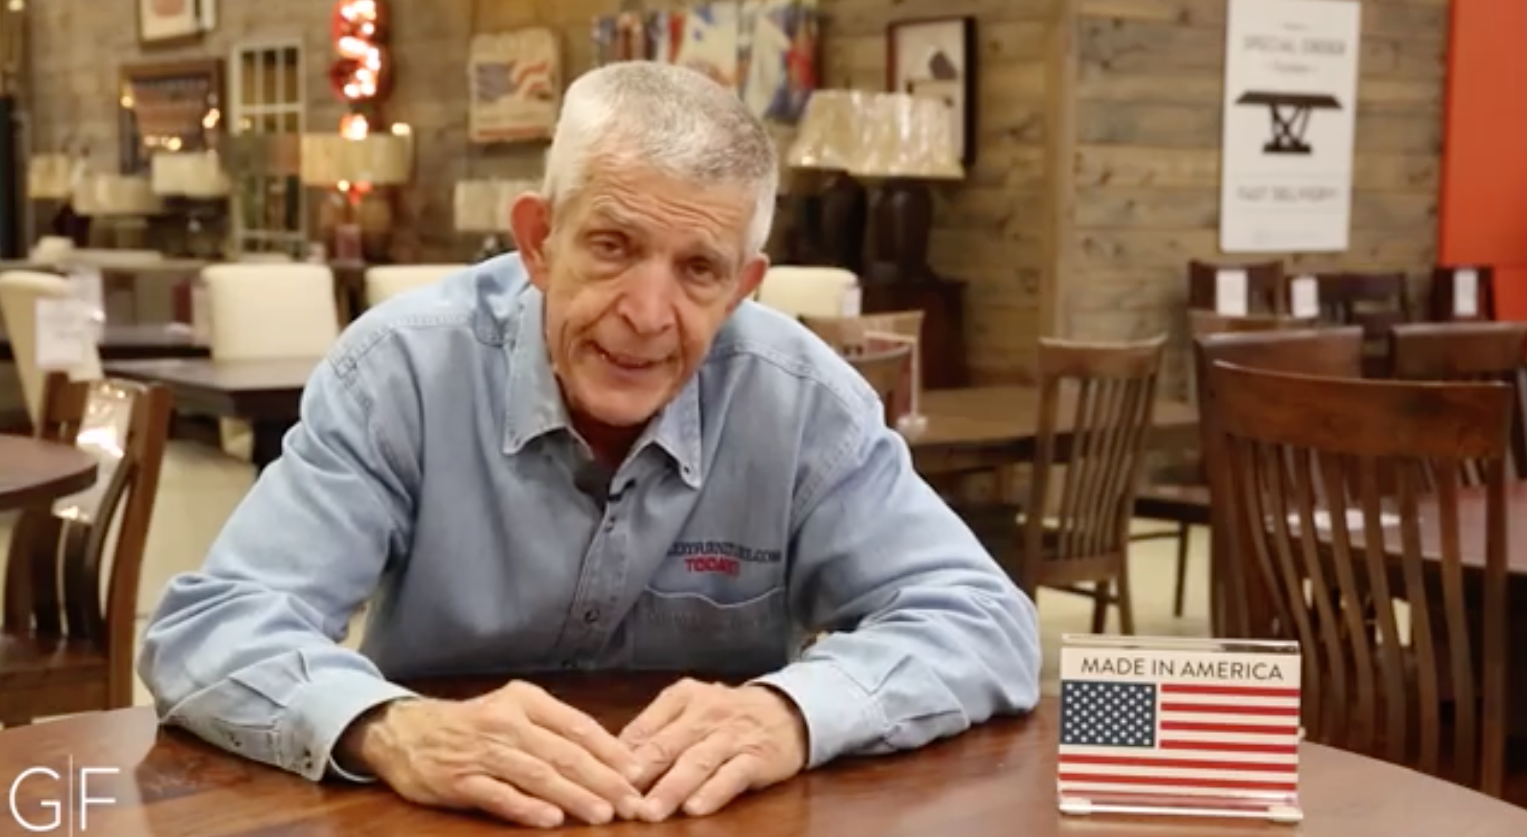 Houston S Mattress Mack Giving Houseful Of Furniture To 30 Families In Need The Daily